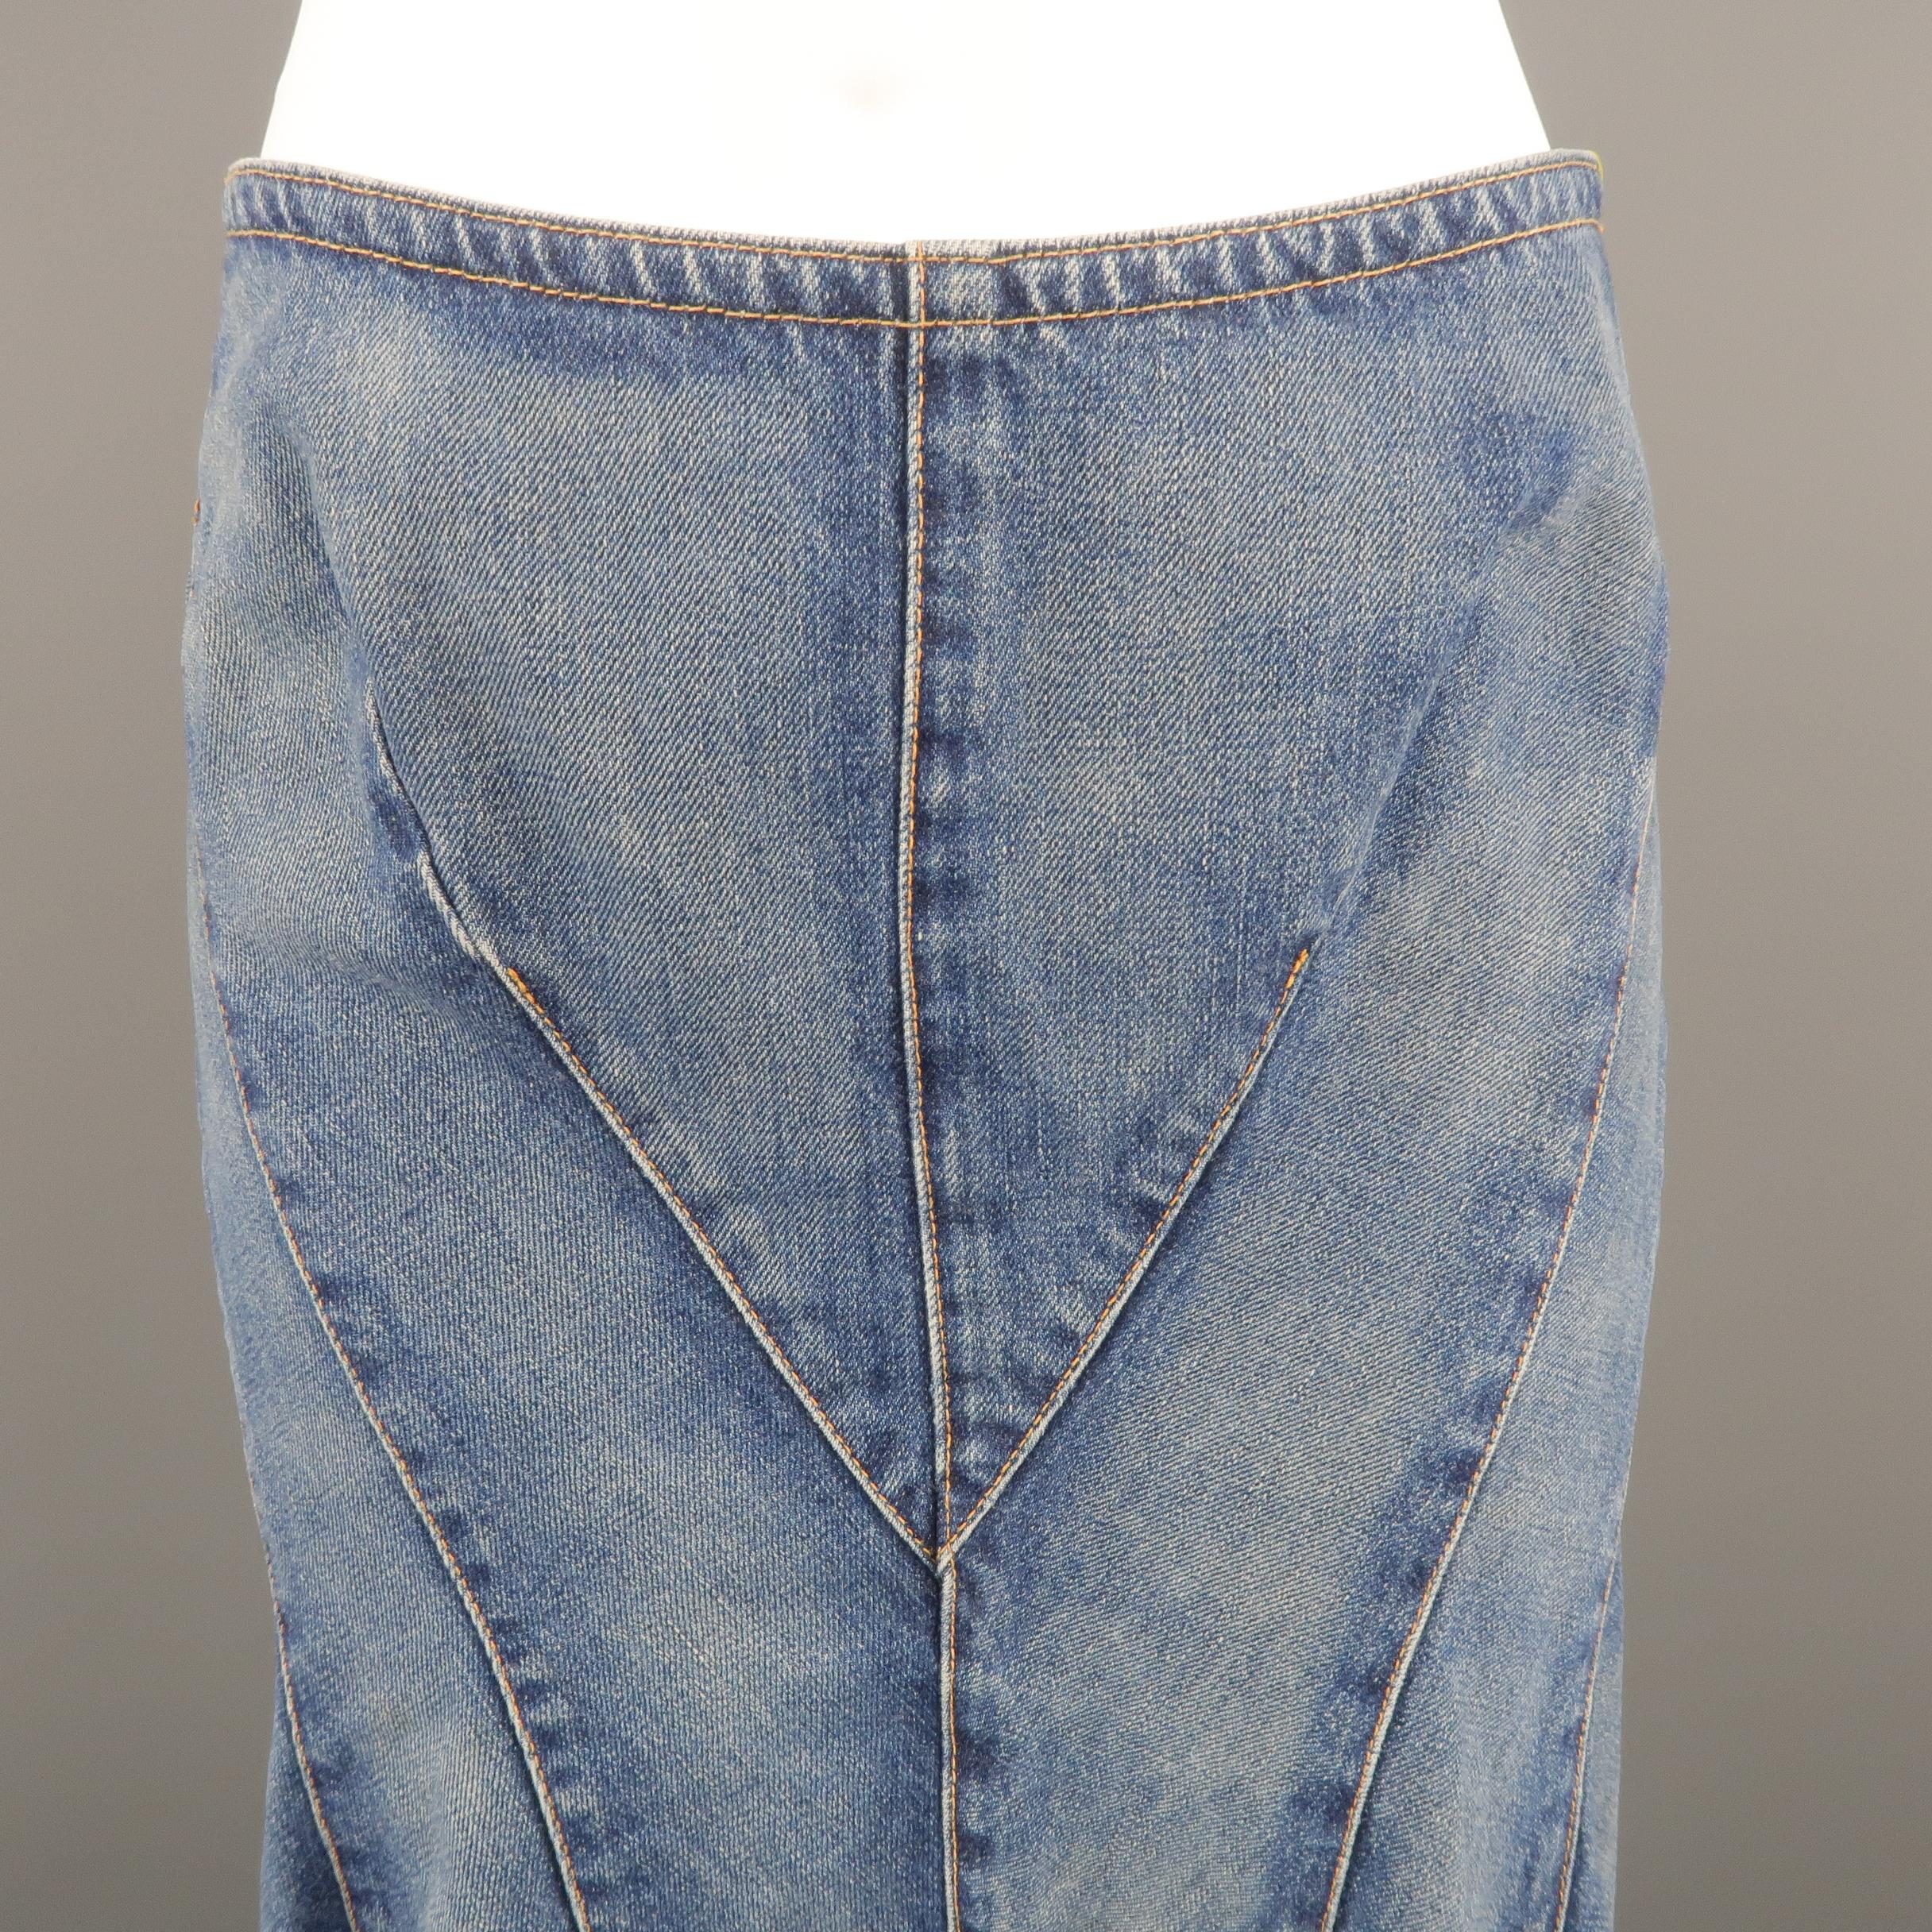 JUNYA WATANABE trumpet skirt comes in a light blue tone washed denim material, featuring visible stitches throughout. Small signals of use, small mark close to the hem on the front.  Made in Japan.
 
Excellent Pre-Owned Condition.
Marked: S
